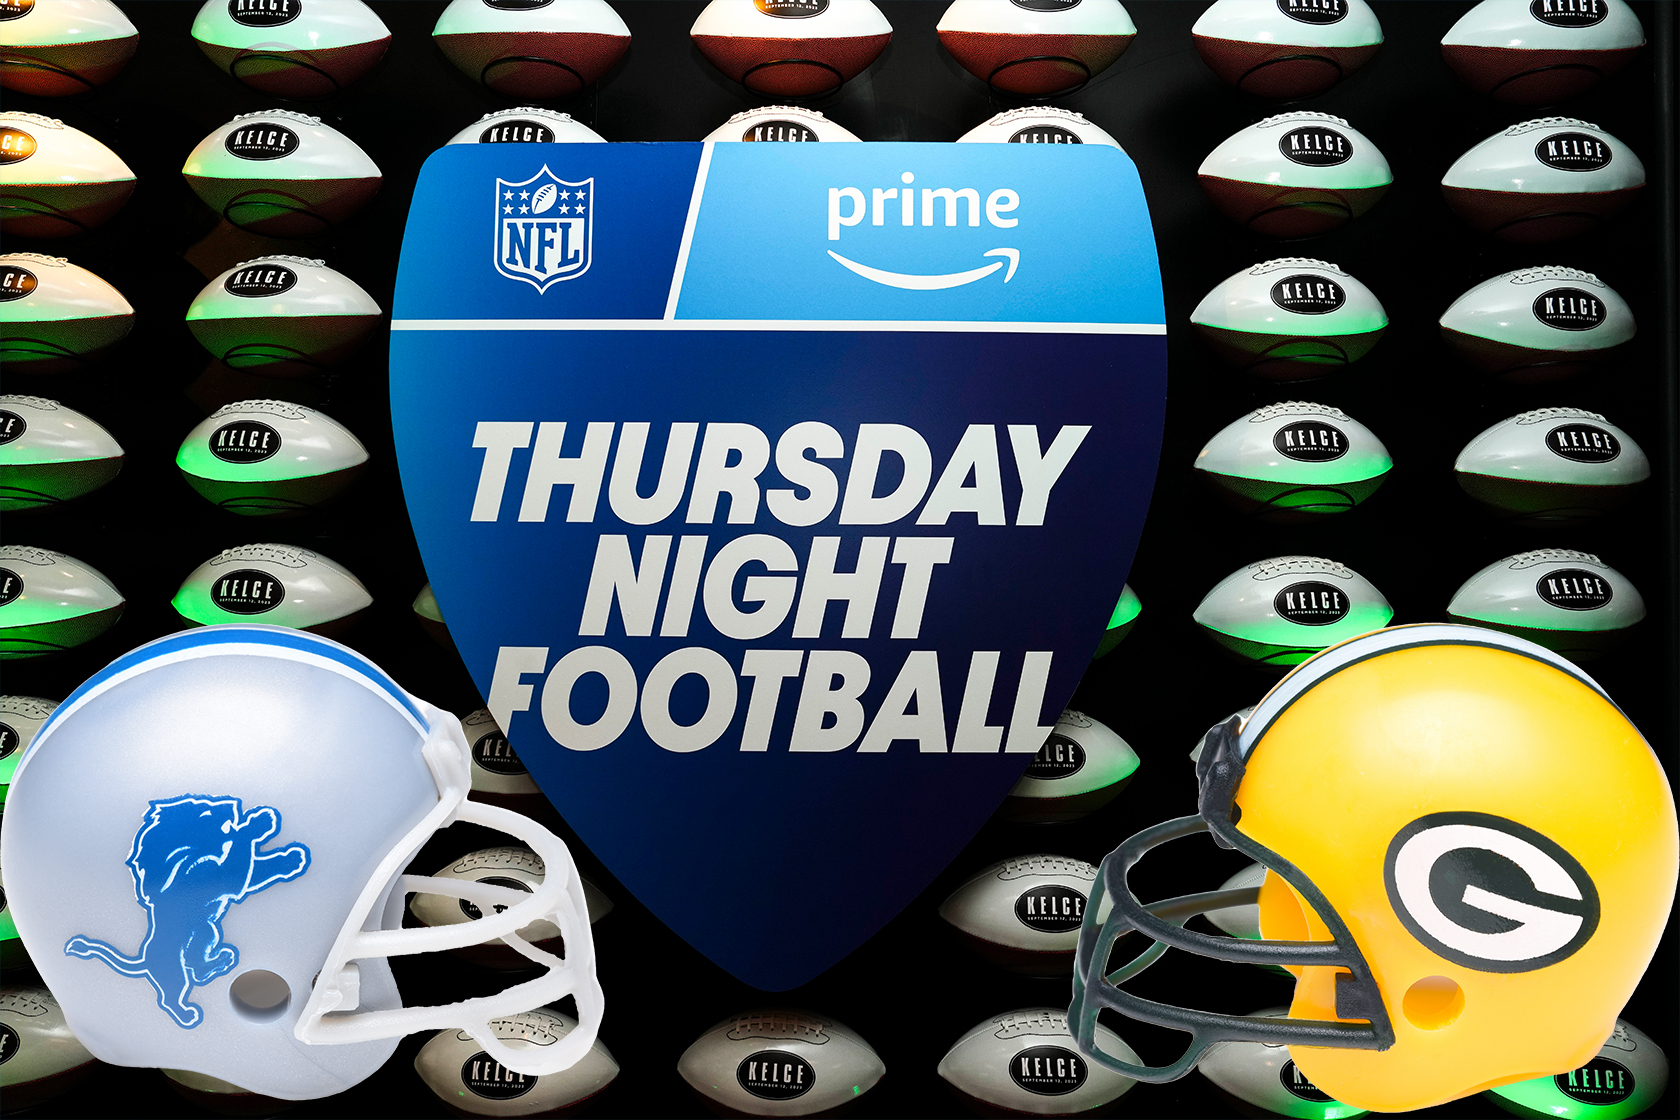 watch the thursday night football game